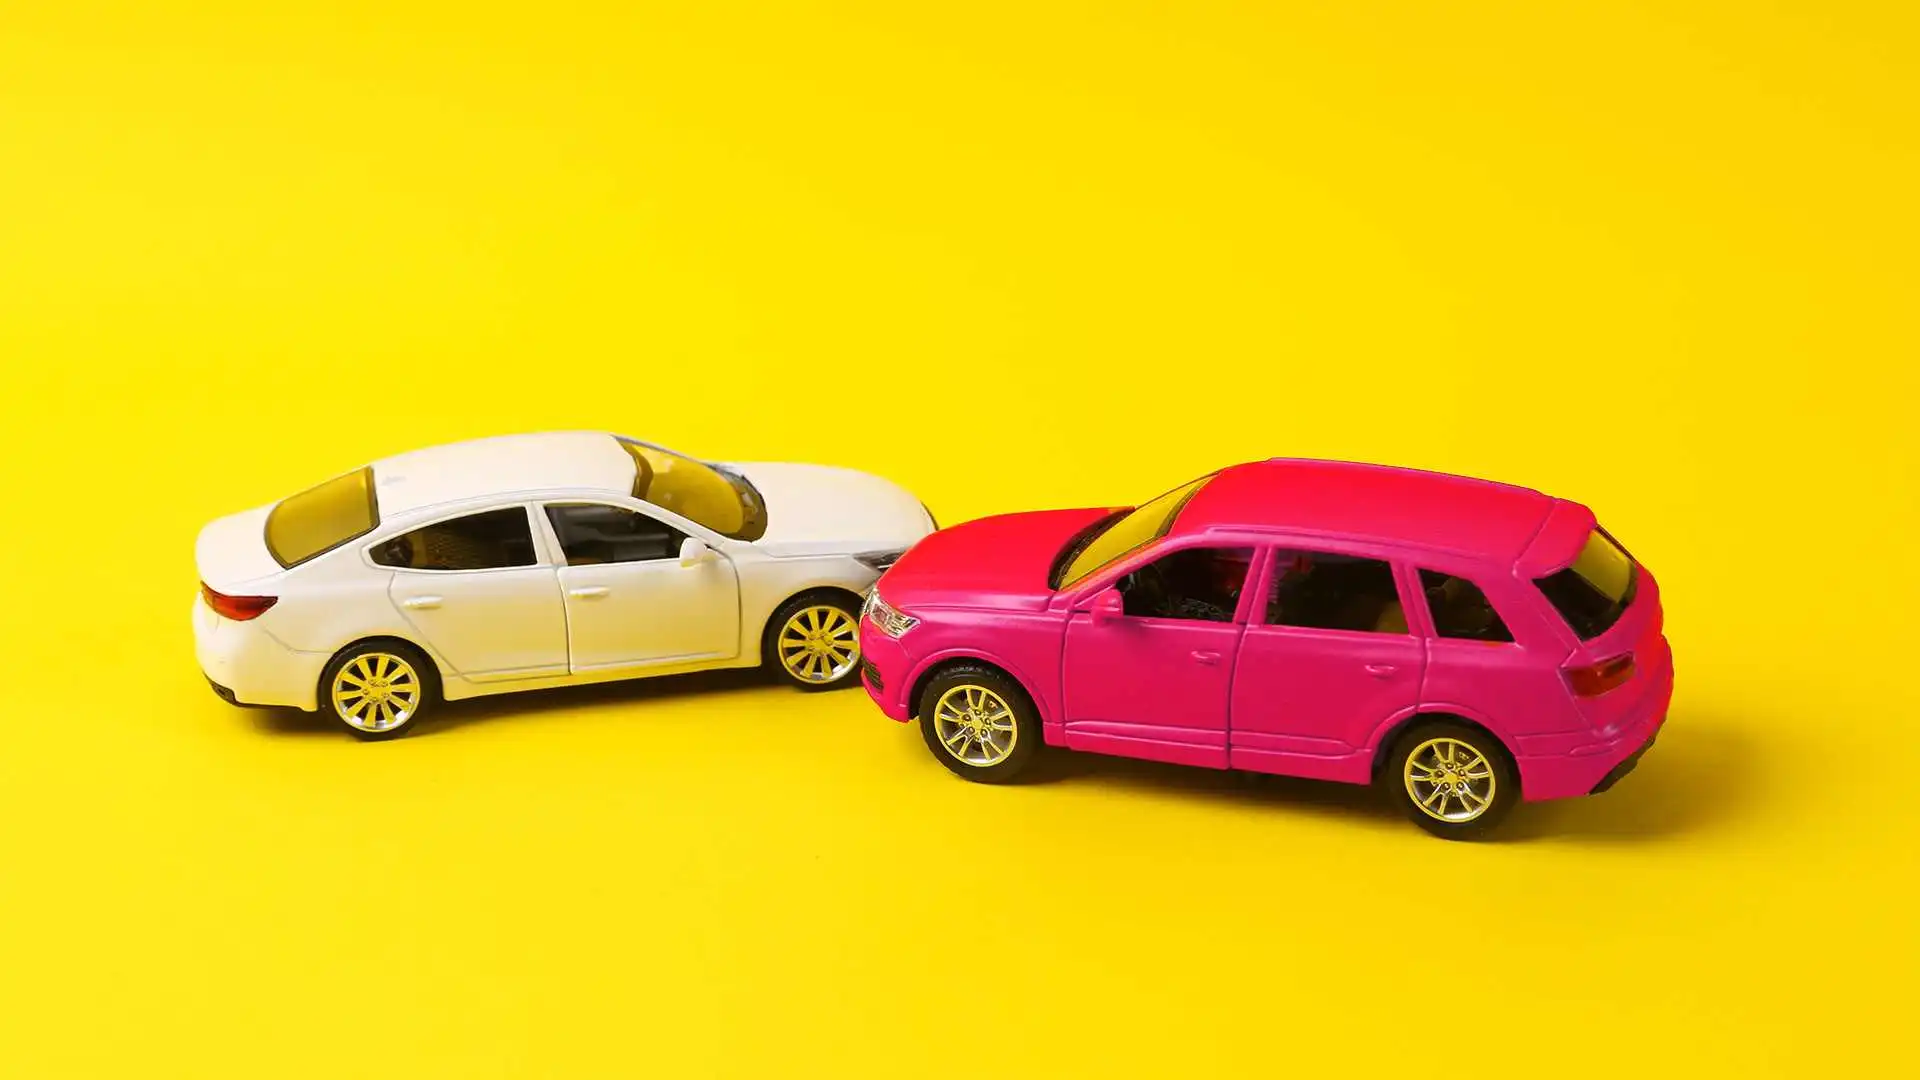 two toy cars posed in a fender bender